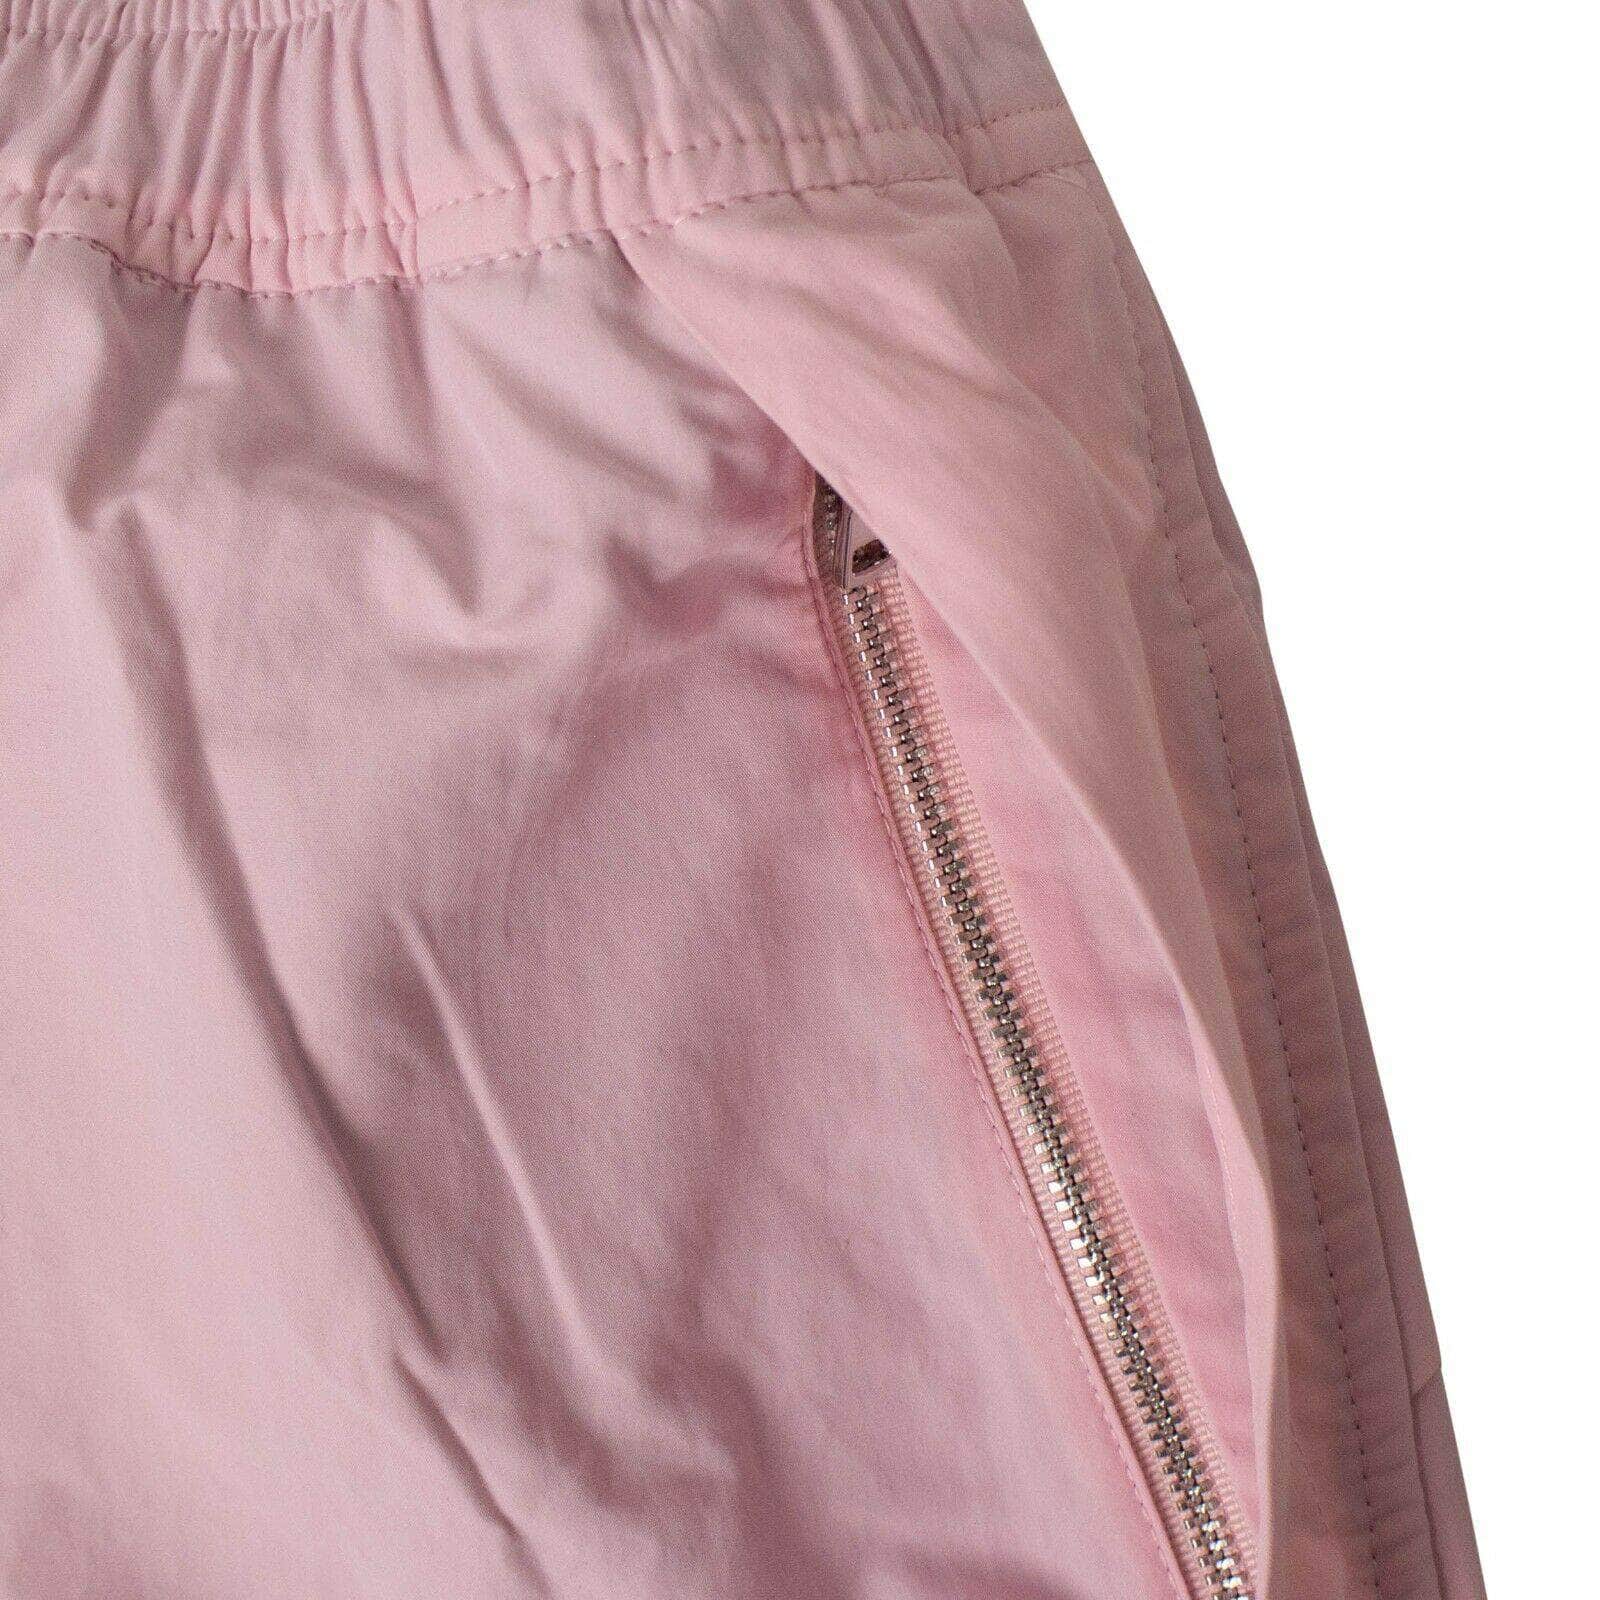 TIM COPPENS Men's Shorts Polyester 'Staple' Shorts - Dusty Pink